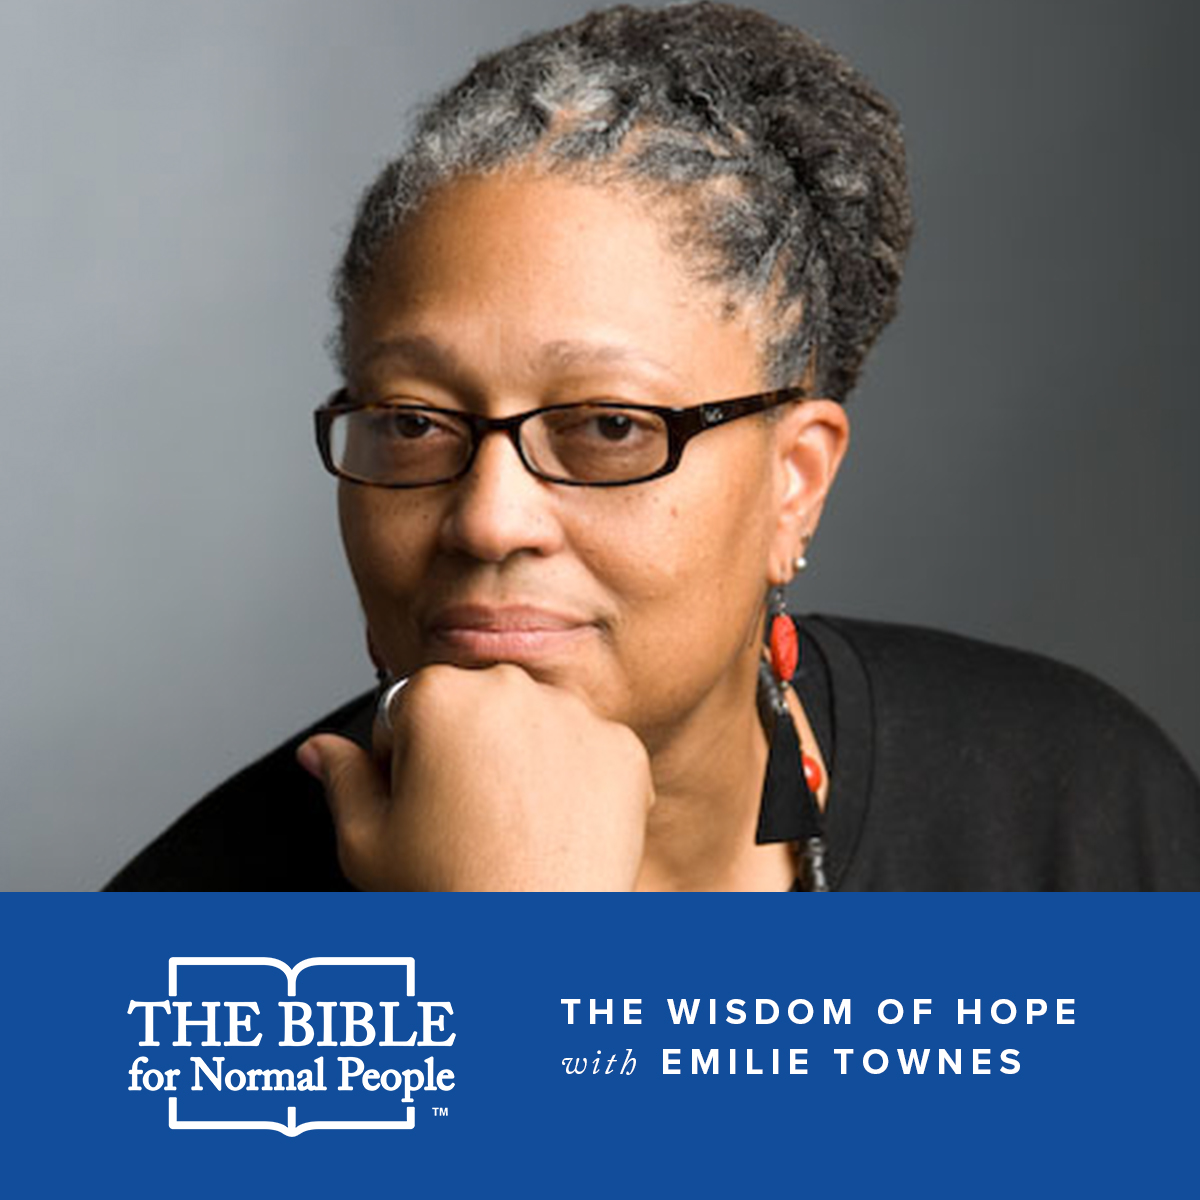 Interview with Emilie Townes: The Wisdom of Hope